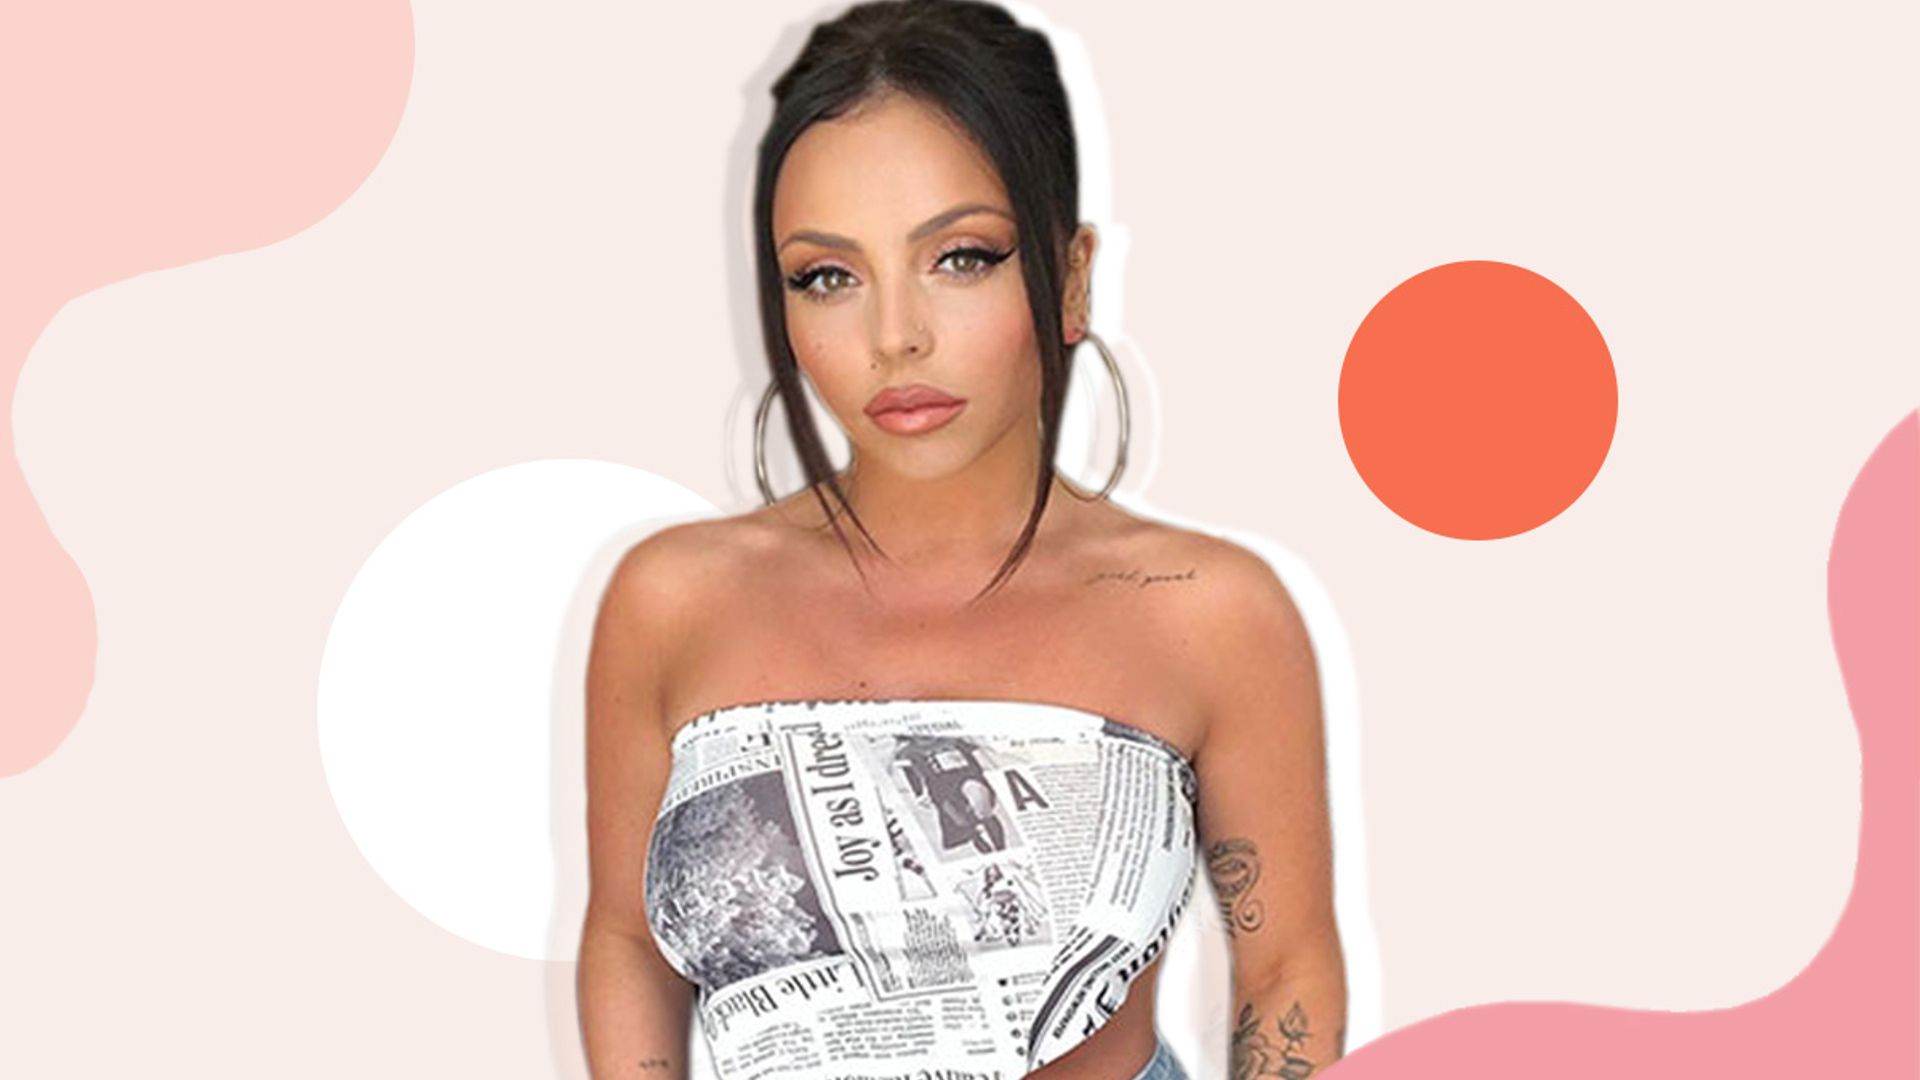 Little Mix's Jesy Nelson shares emotional post about body image